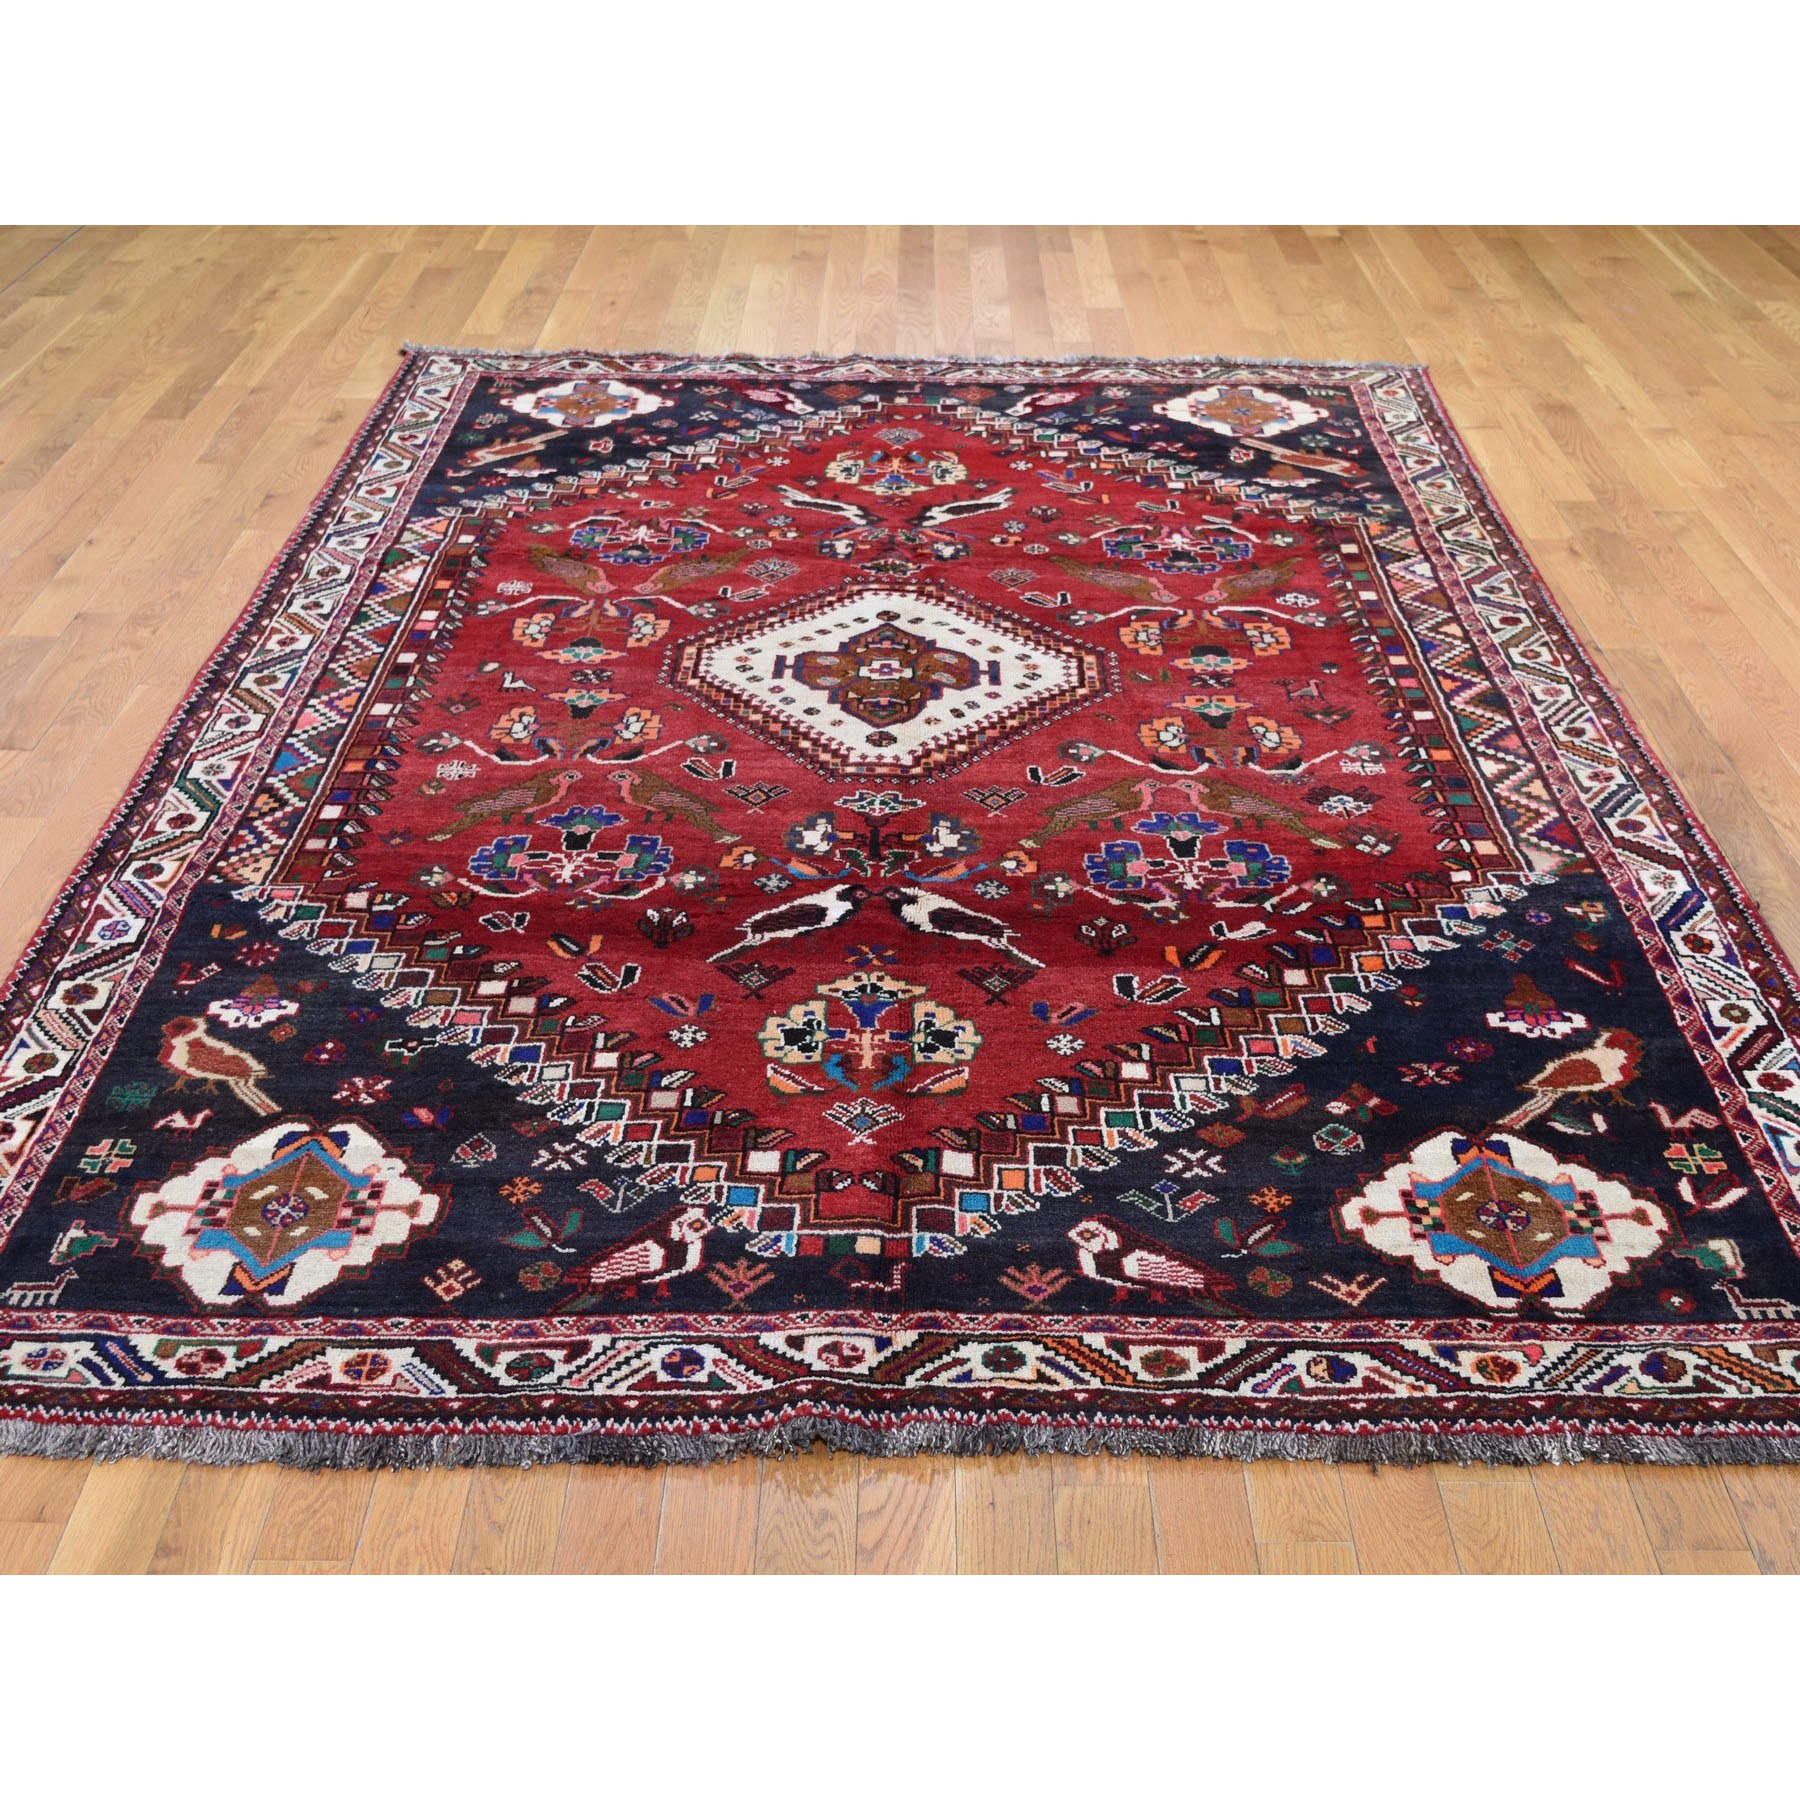 6-9 x10-2  Red New persian Shiraz With Birds Pure Wool Hand Knotted Oriental Rug 